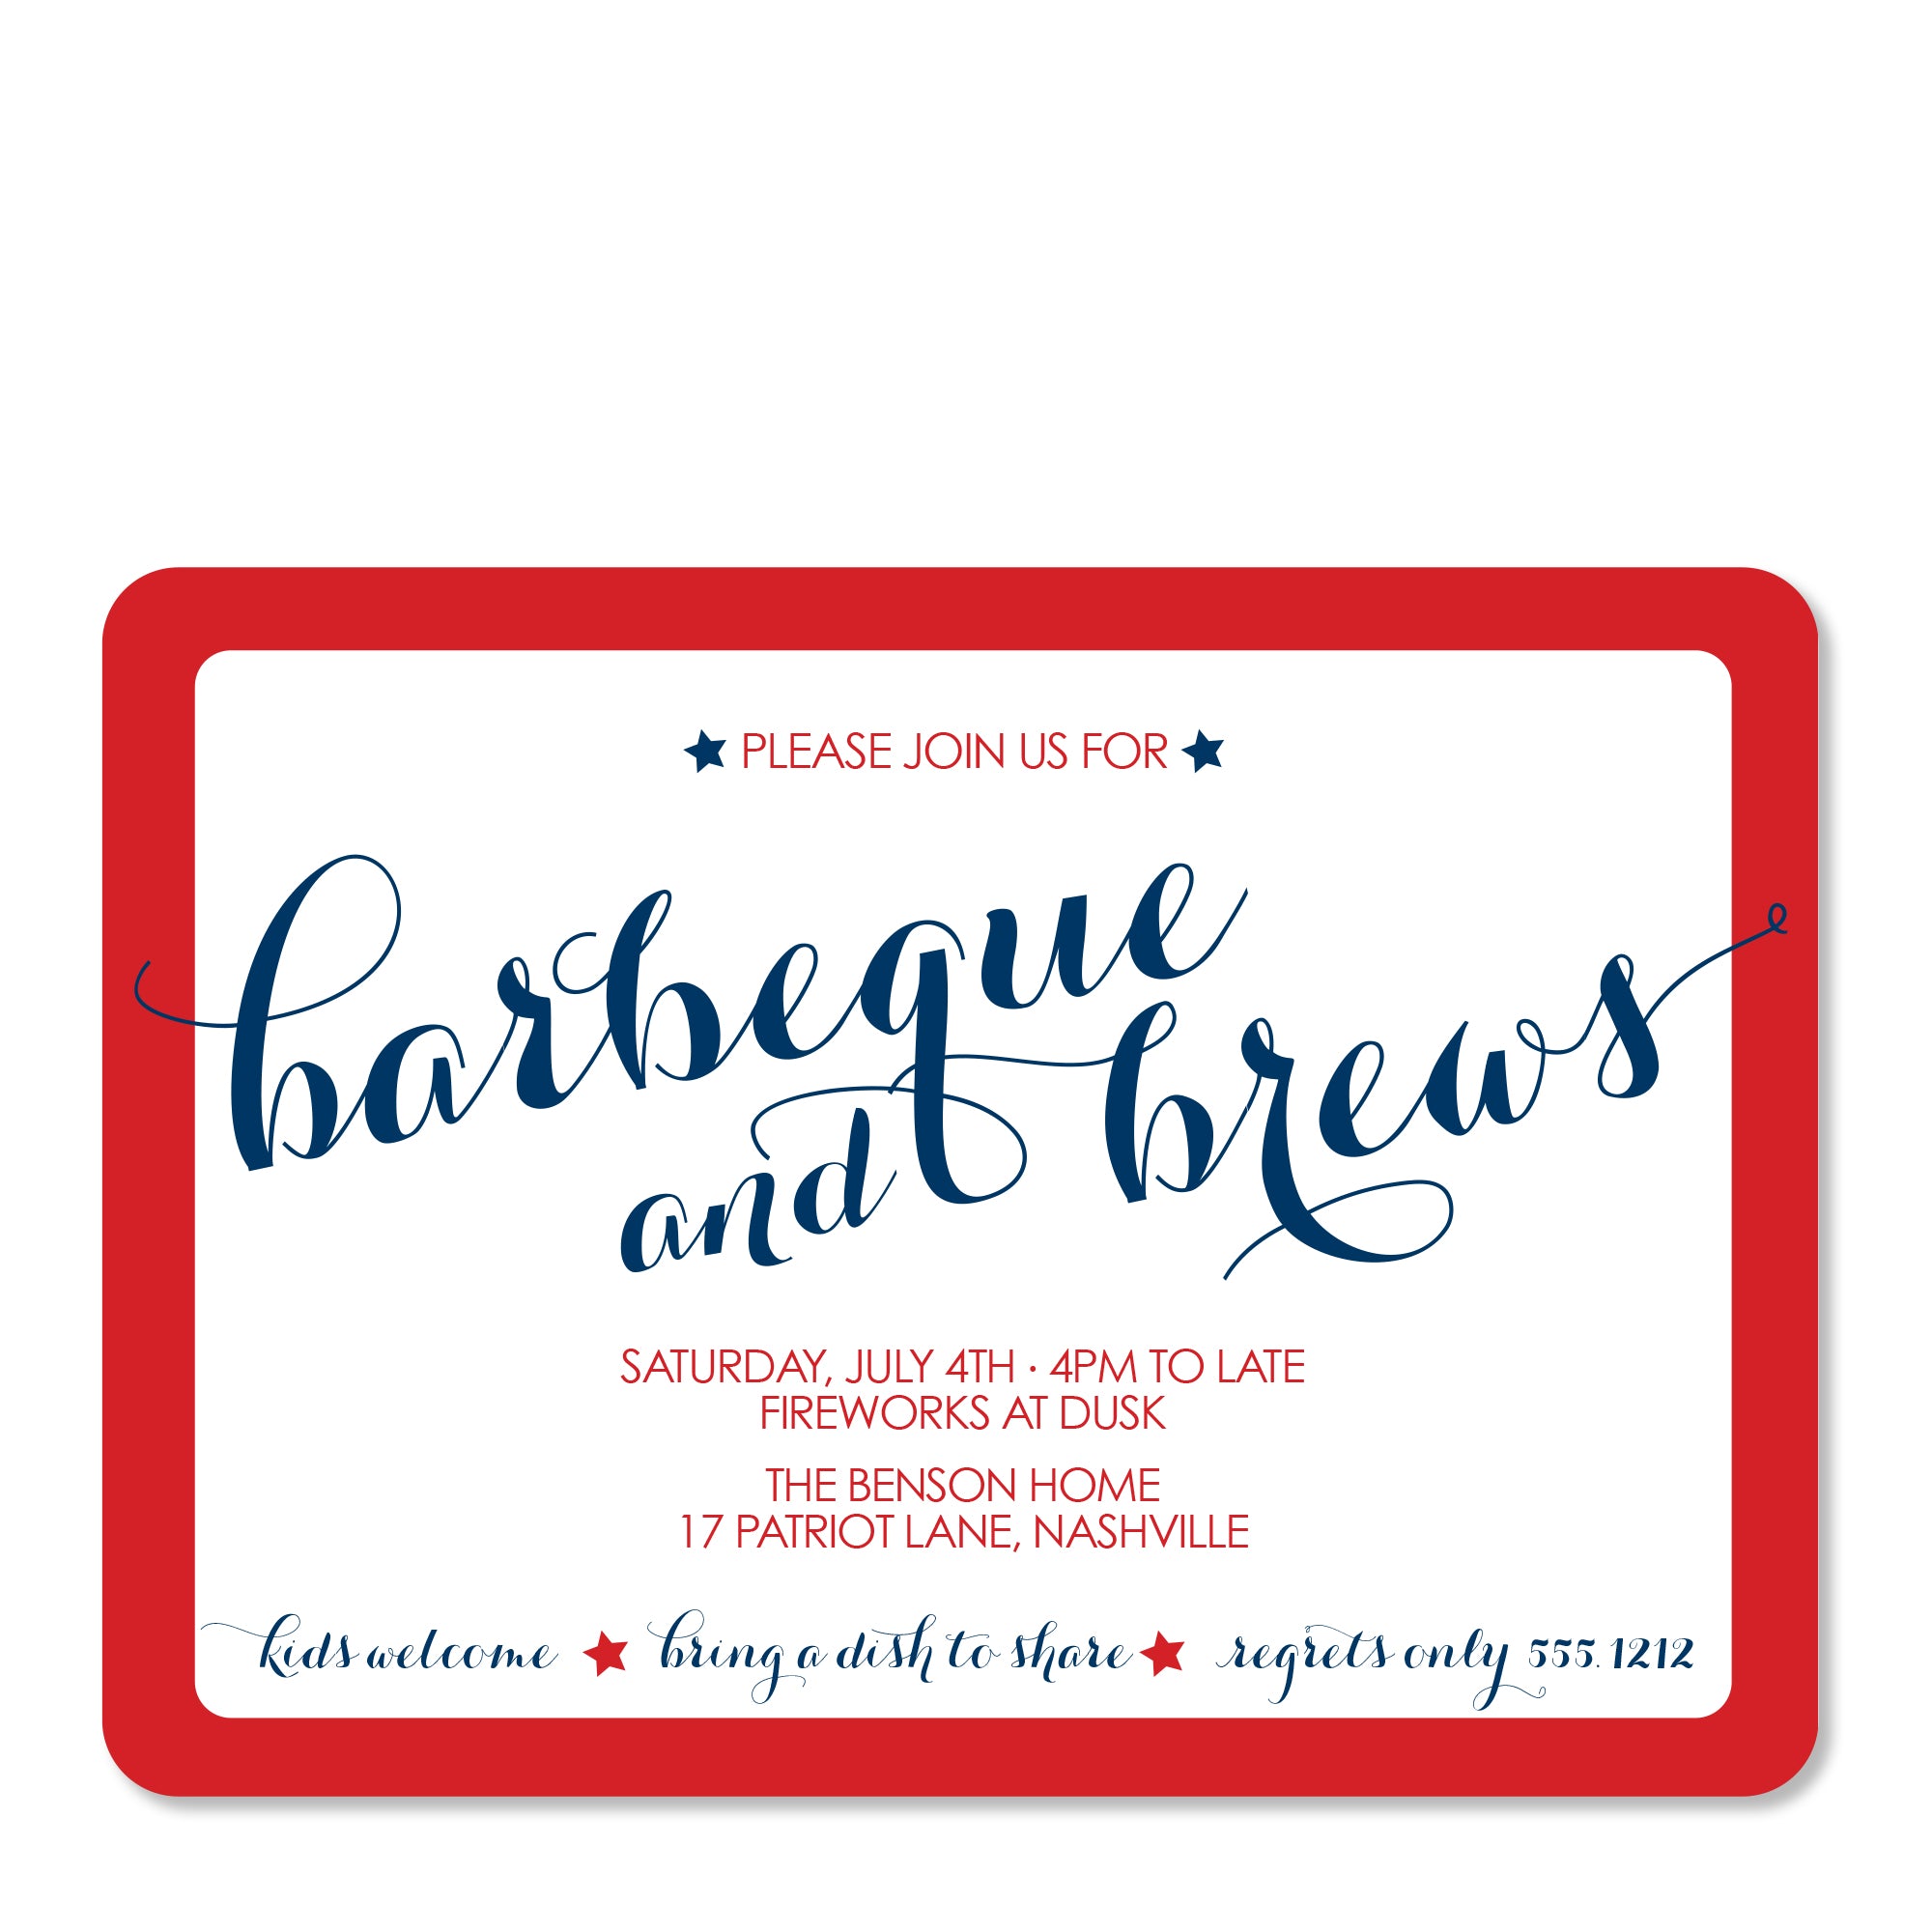 4TH OF JULY INVITATION, BARBECUE AND BREWS, RED WHITE AND BLUE, PIPSY.COM, front